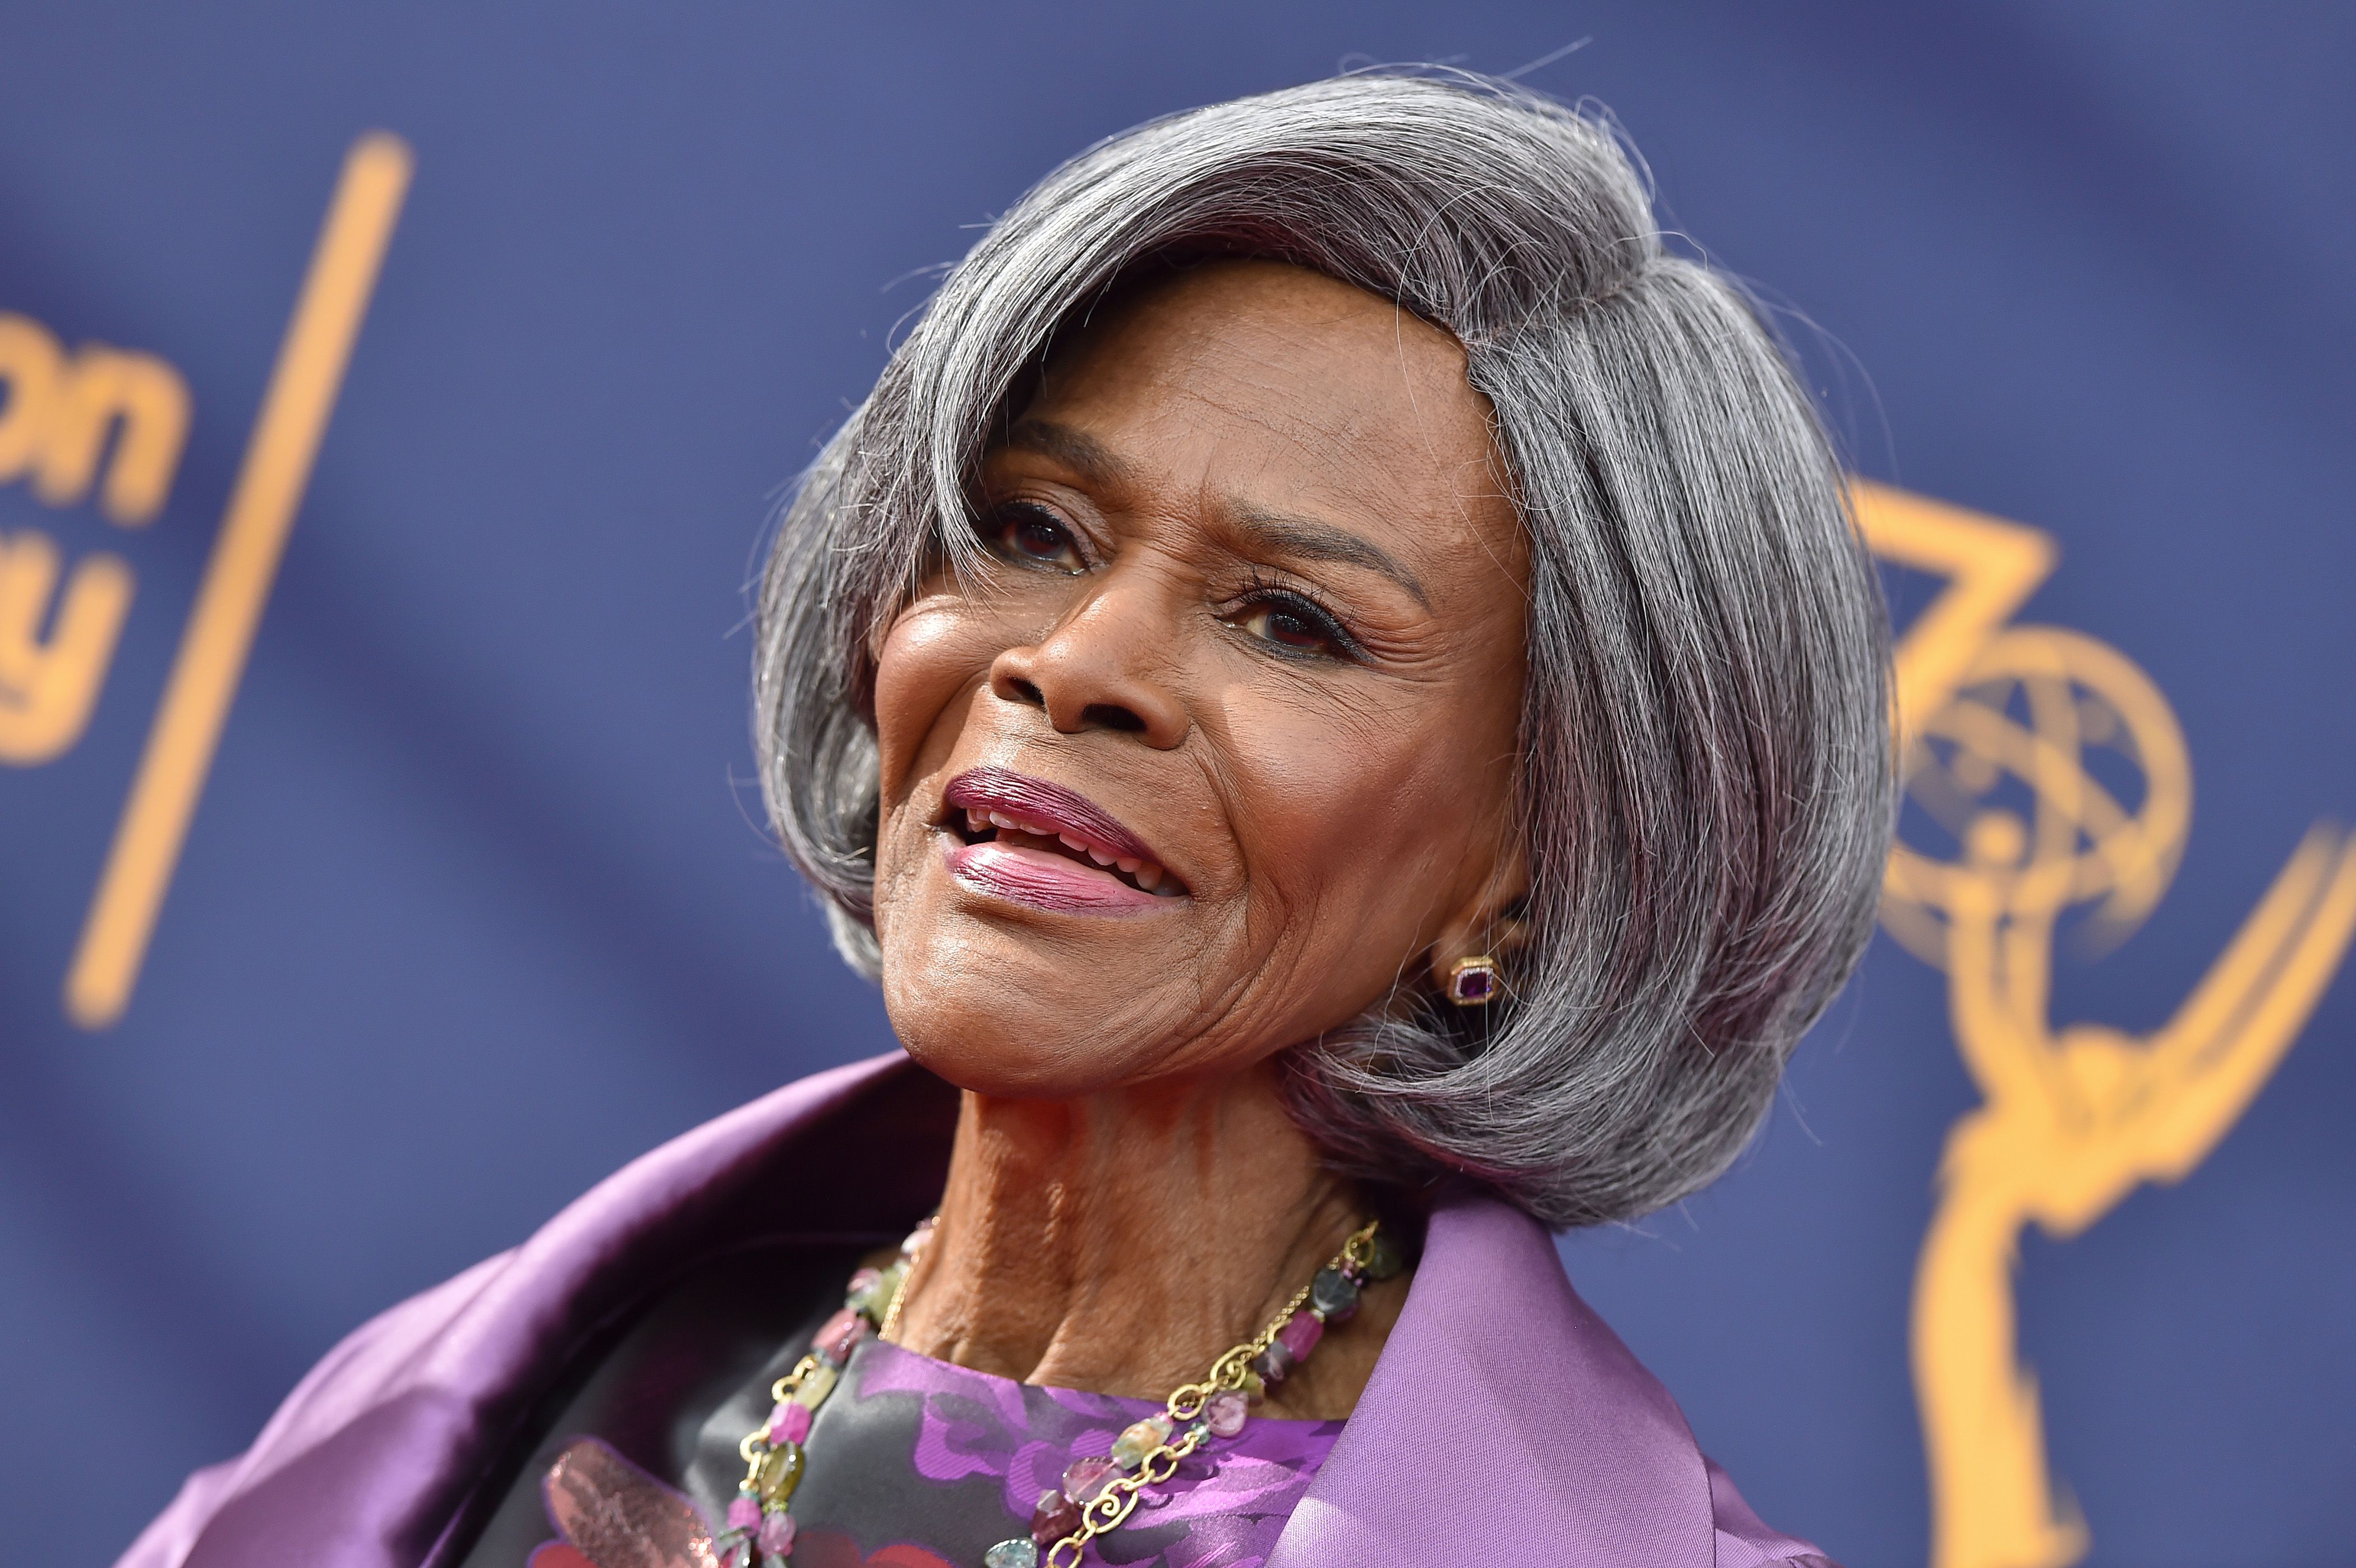 Cicely Tyson, Trailblazing Screen Icon, Has Died at 96